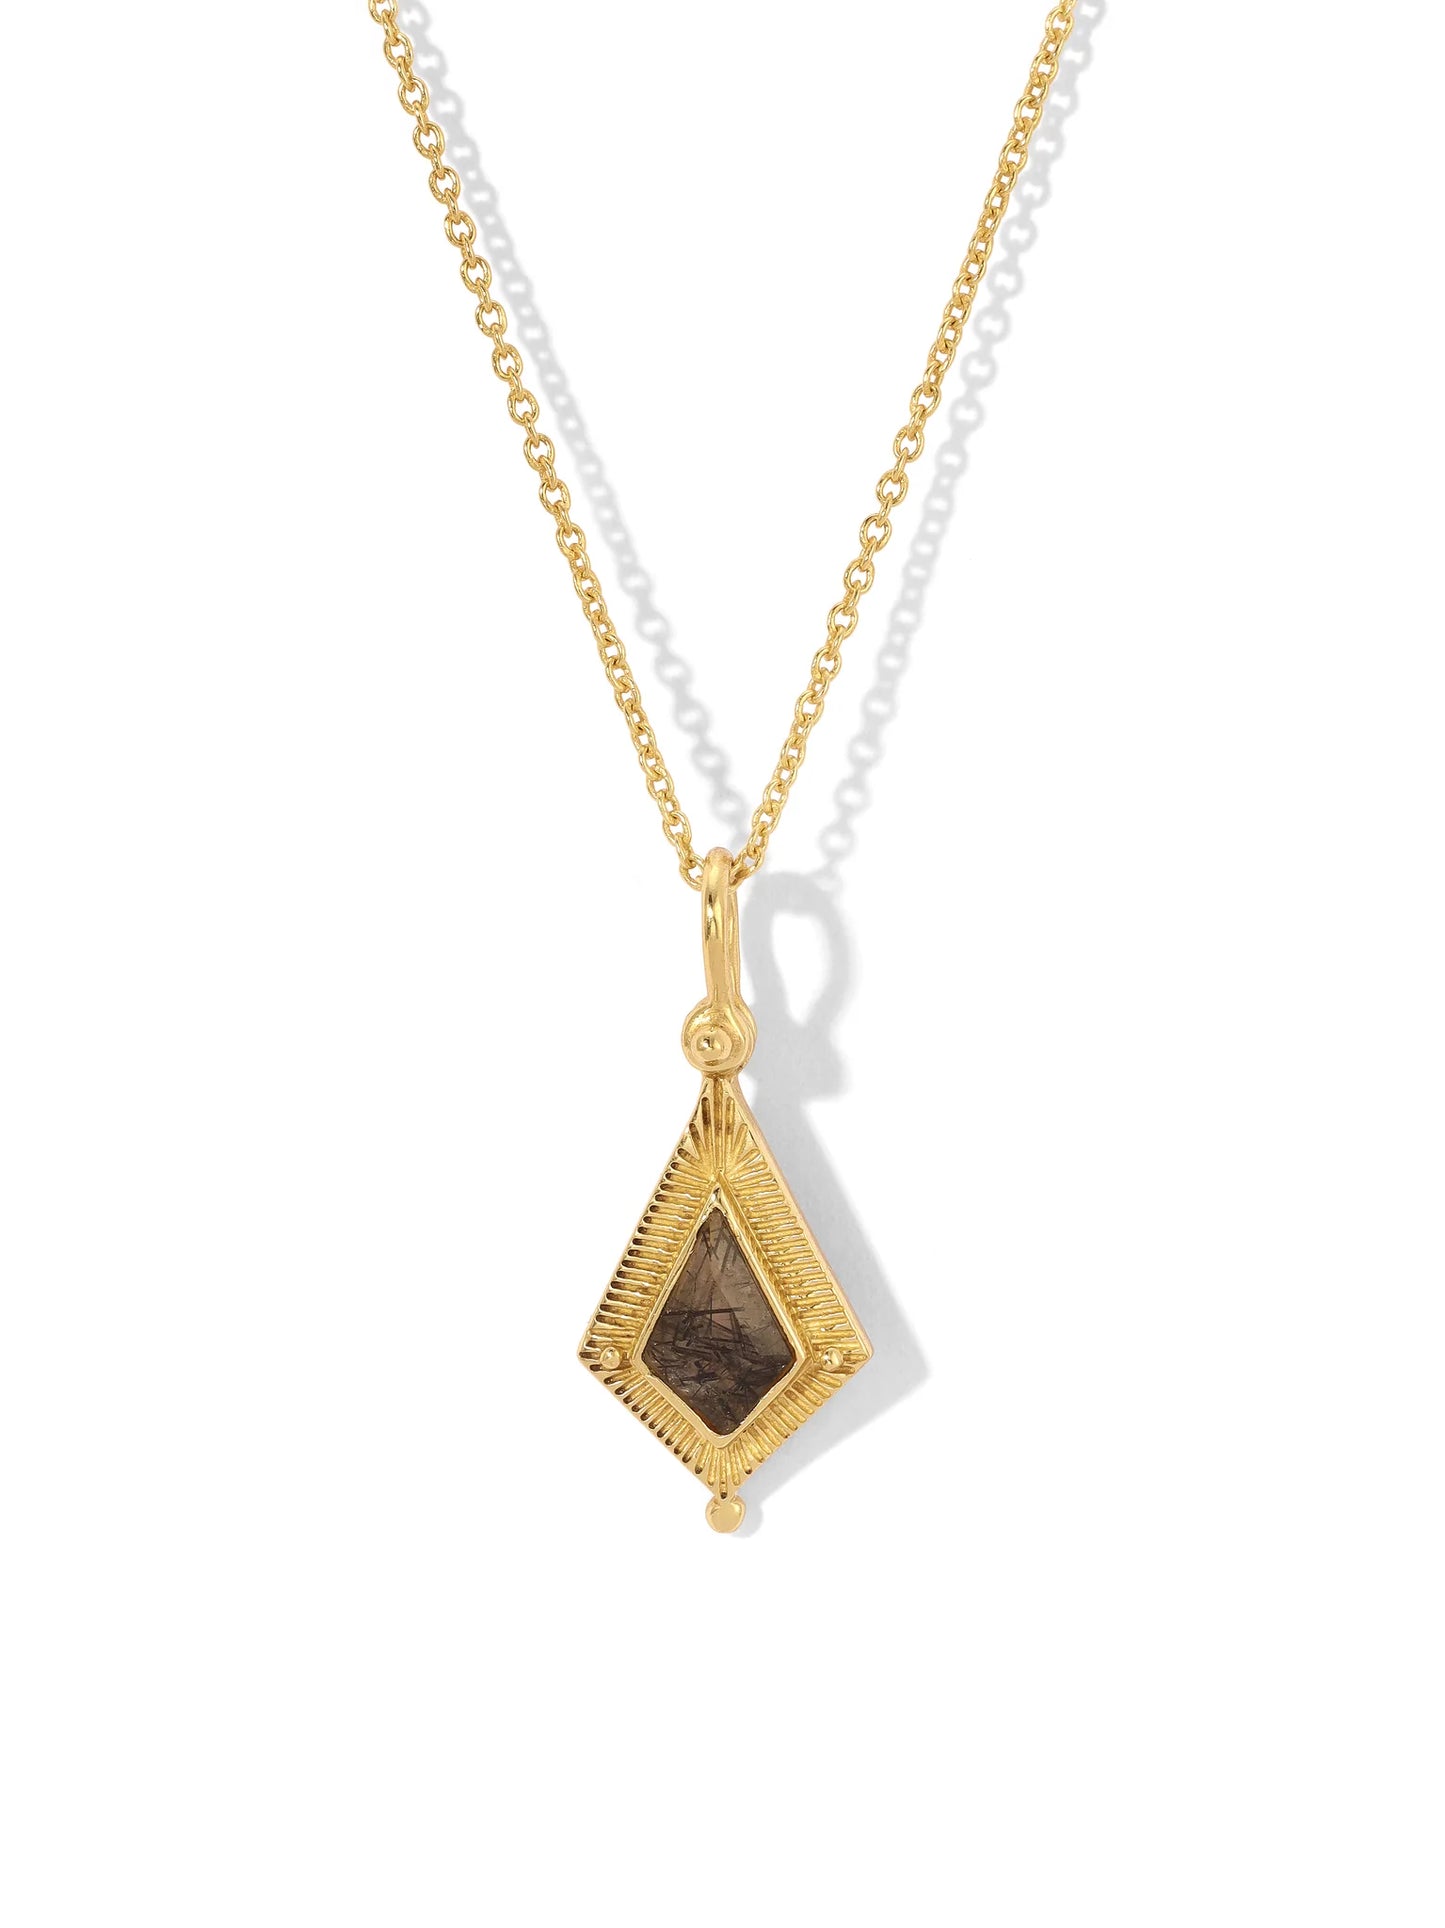 The Fayette Rutile Necklace